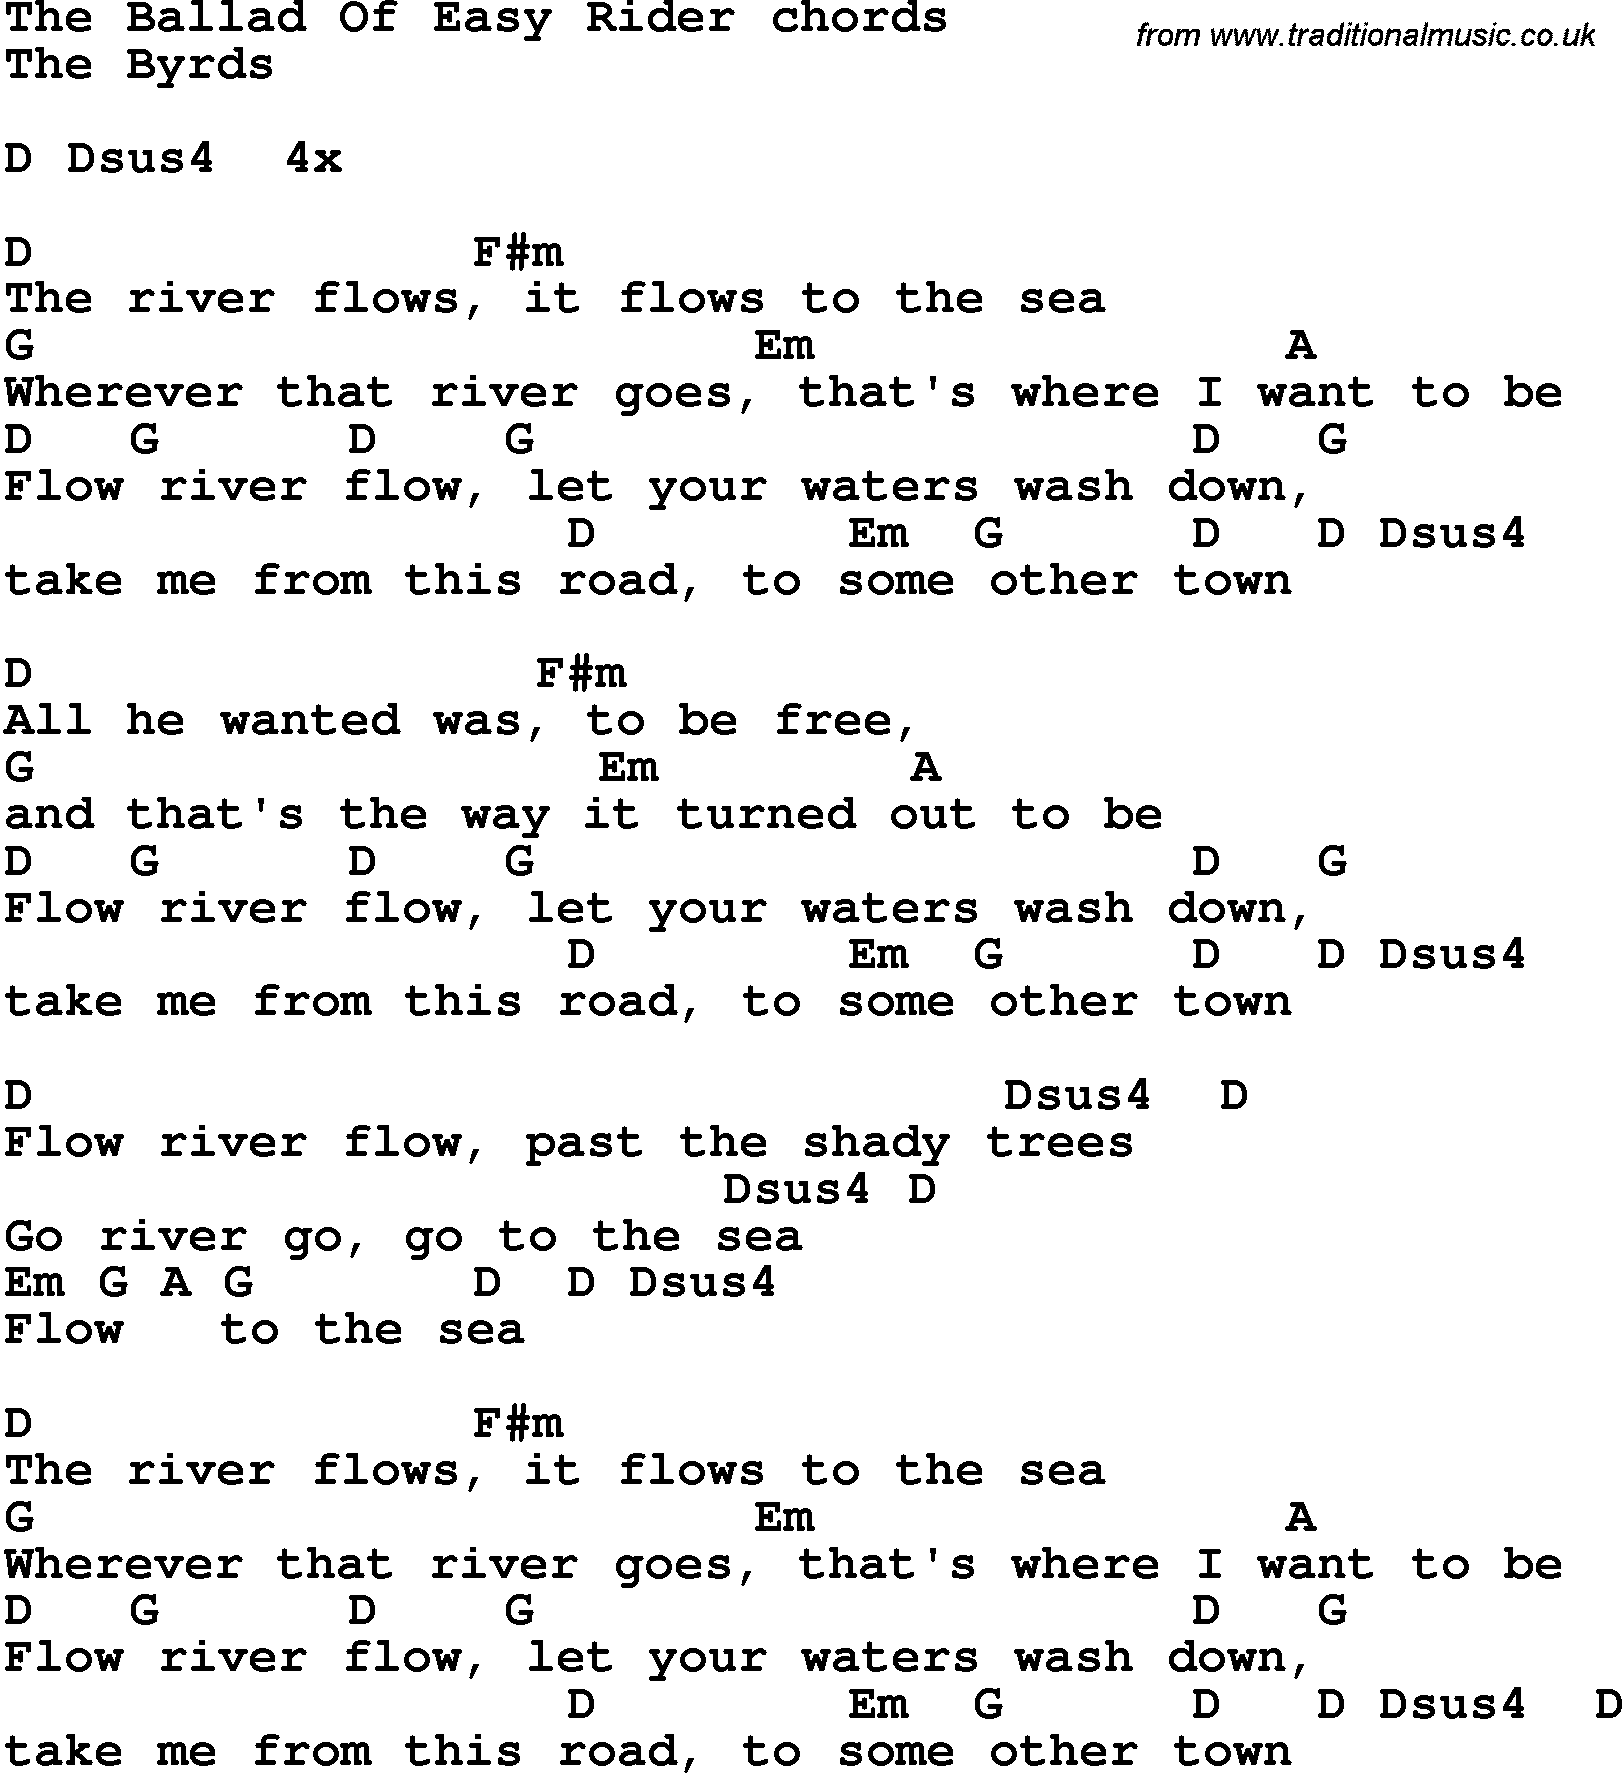 Song Lyrics with guitar chords for The Ballad Of Easy Rider